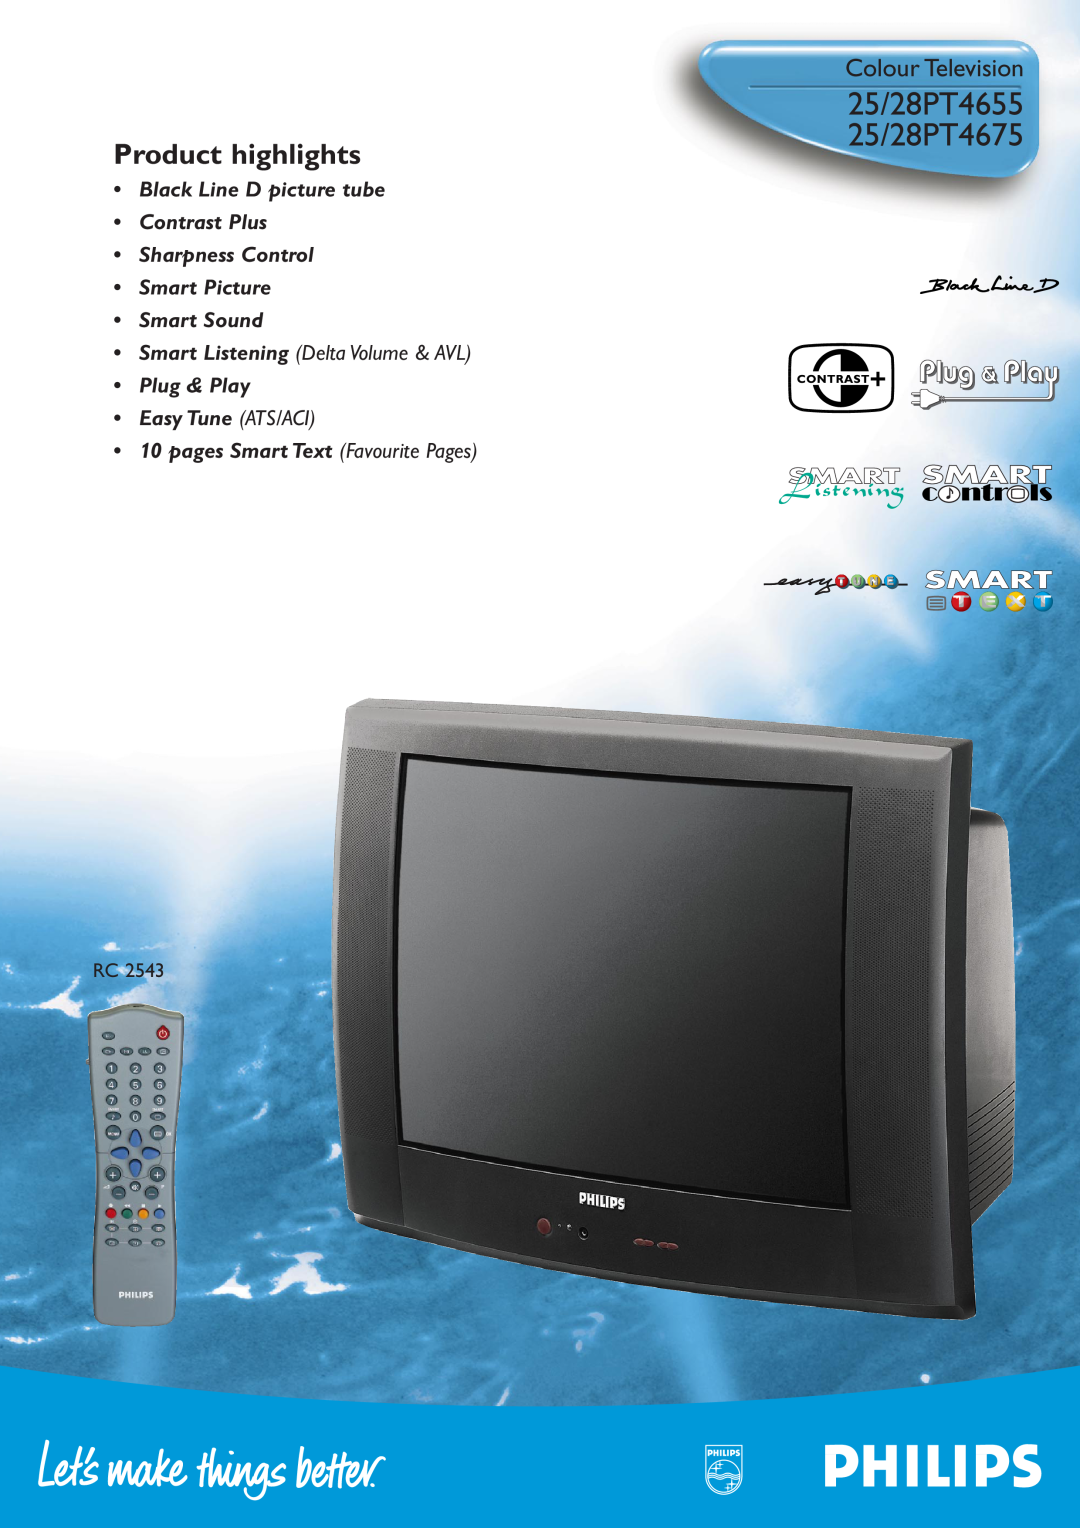 Philips manual 25/28PT4655 25/28PT4675, Colour Television, Product highlights, Smart Picture Smart Sound 